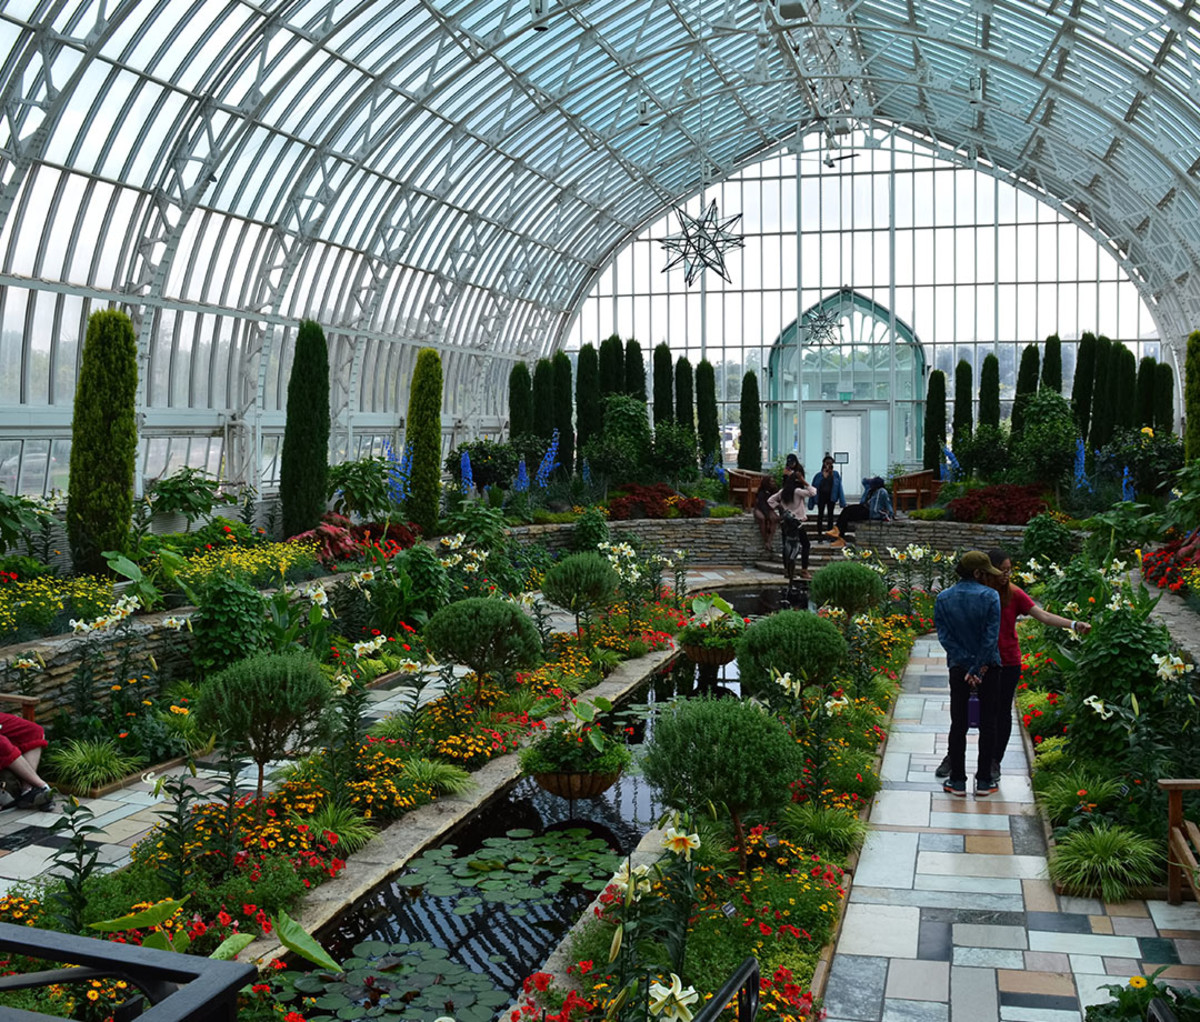 The Sunken Garden at Como Zoo and Conservatory in Saint Paul, MN